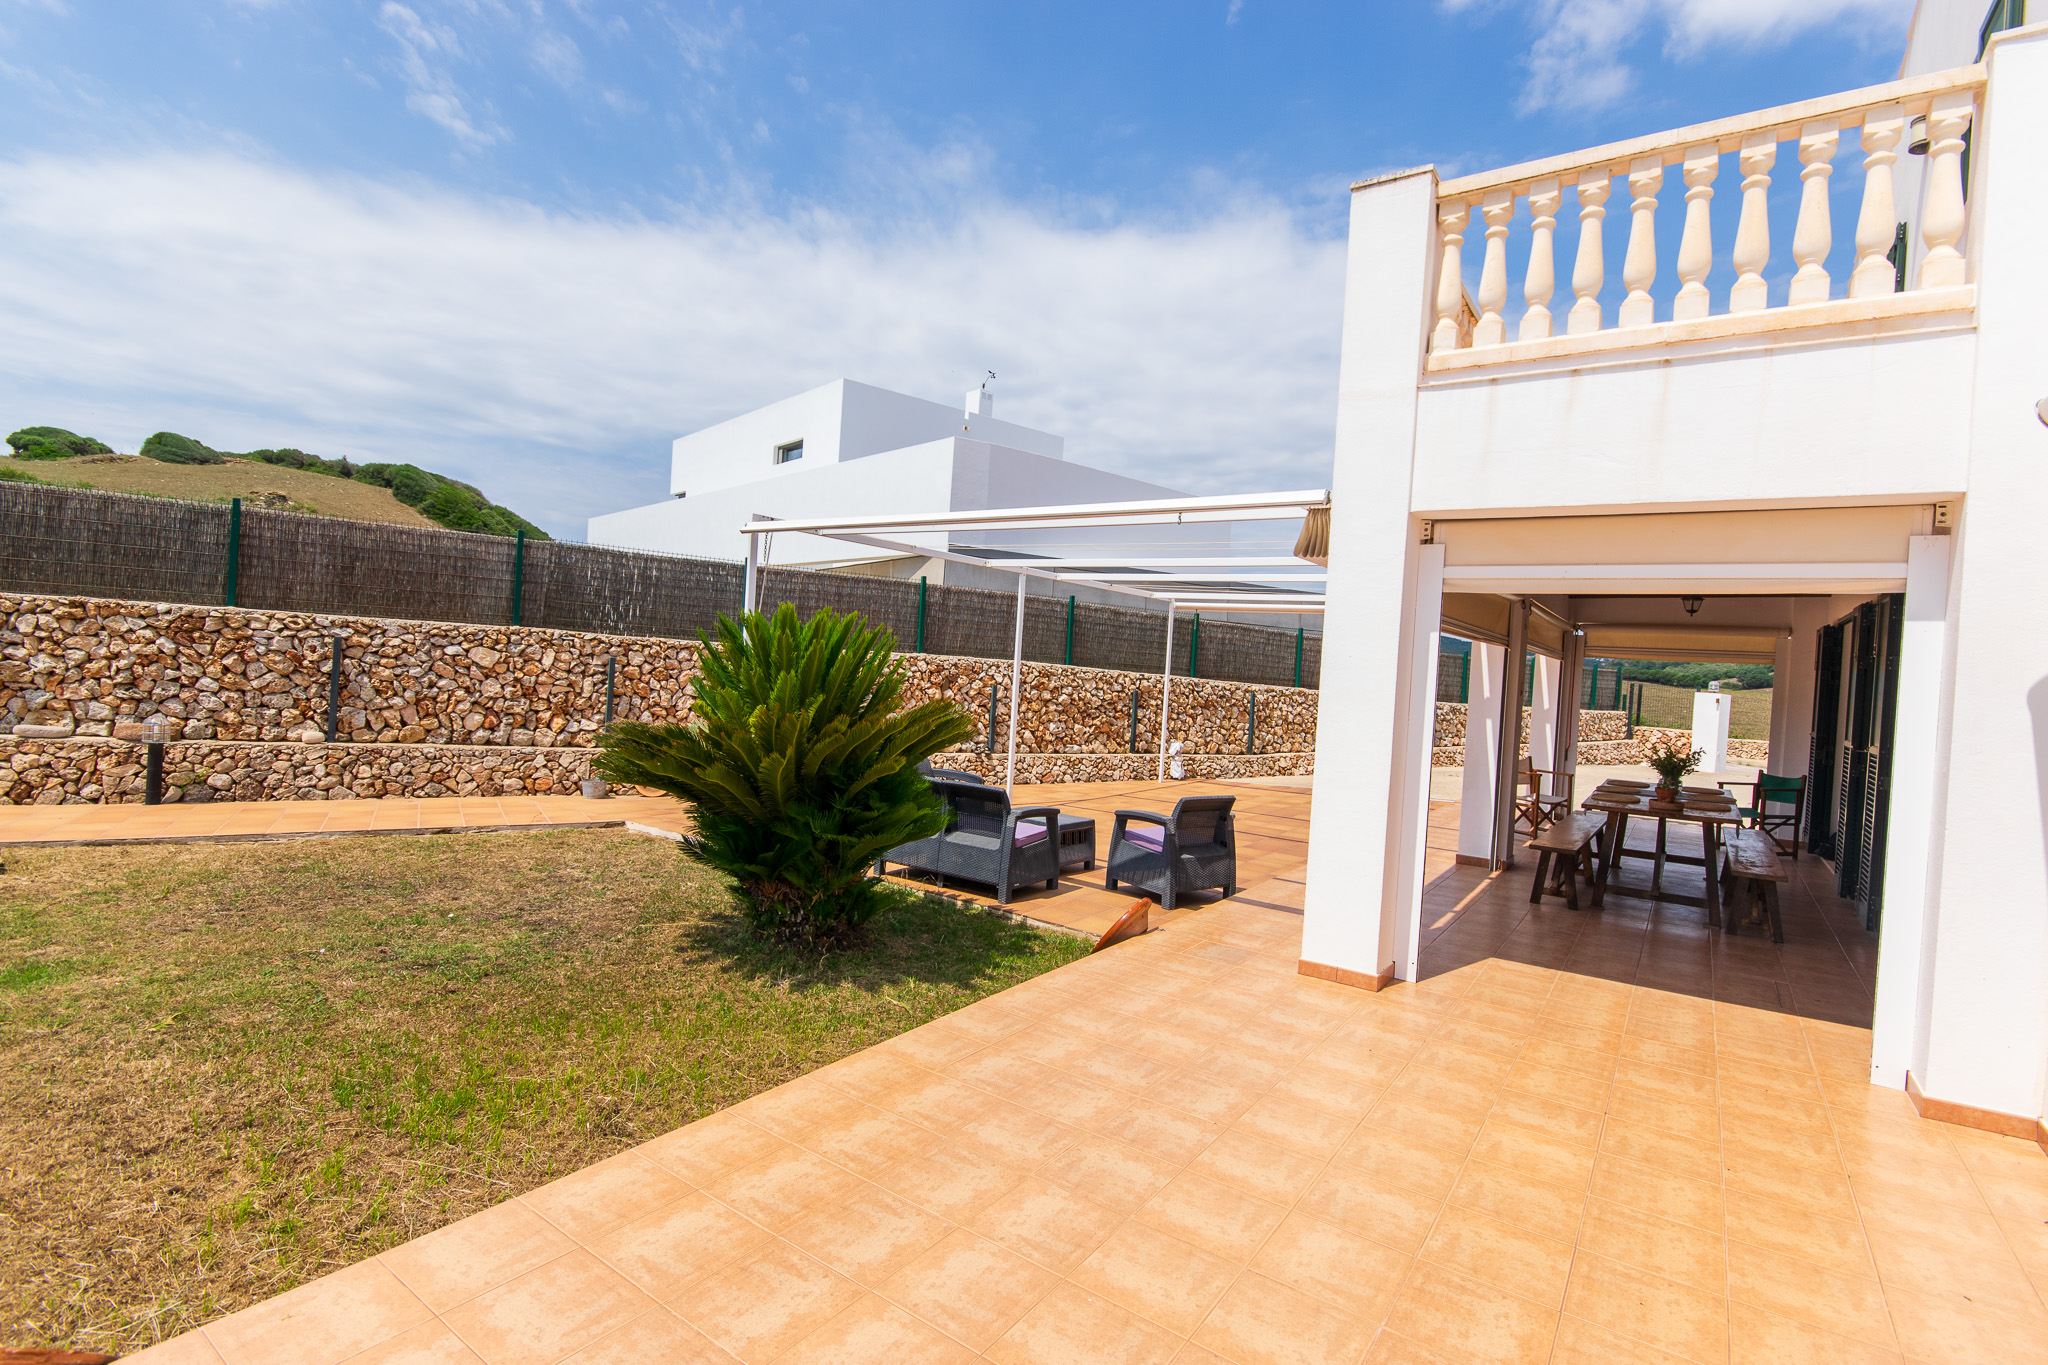 Terrace of a Menorcan house with pool and garage in Mercadal